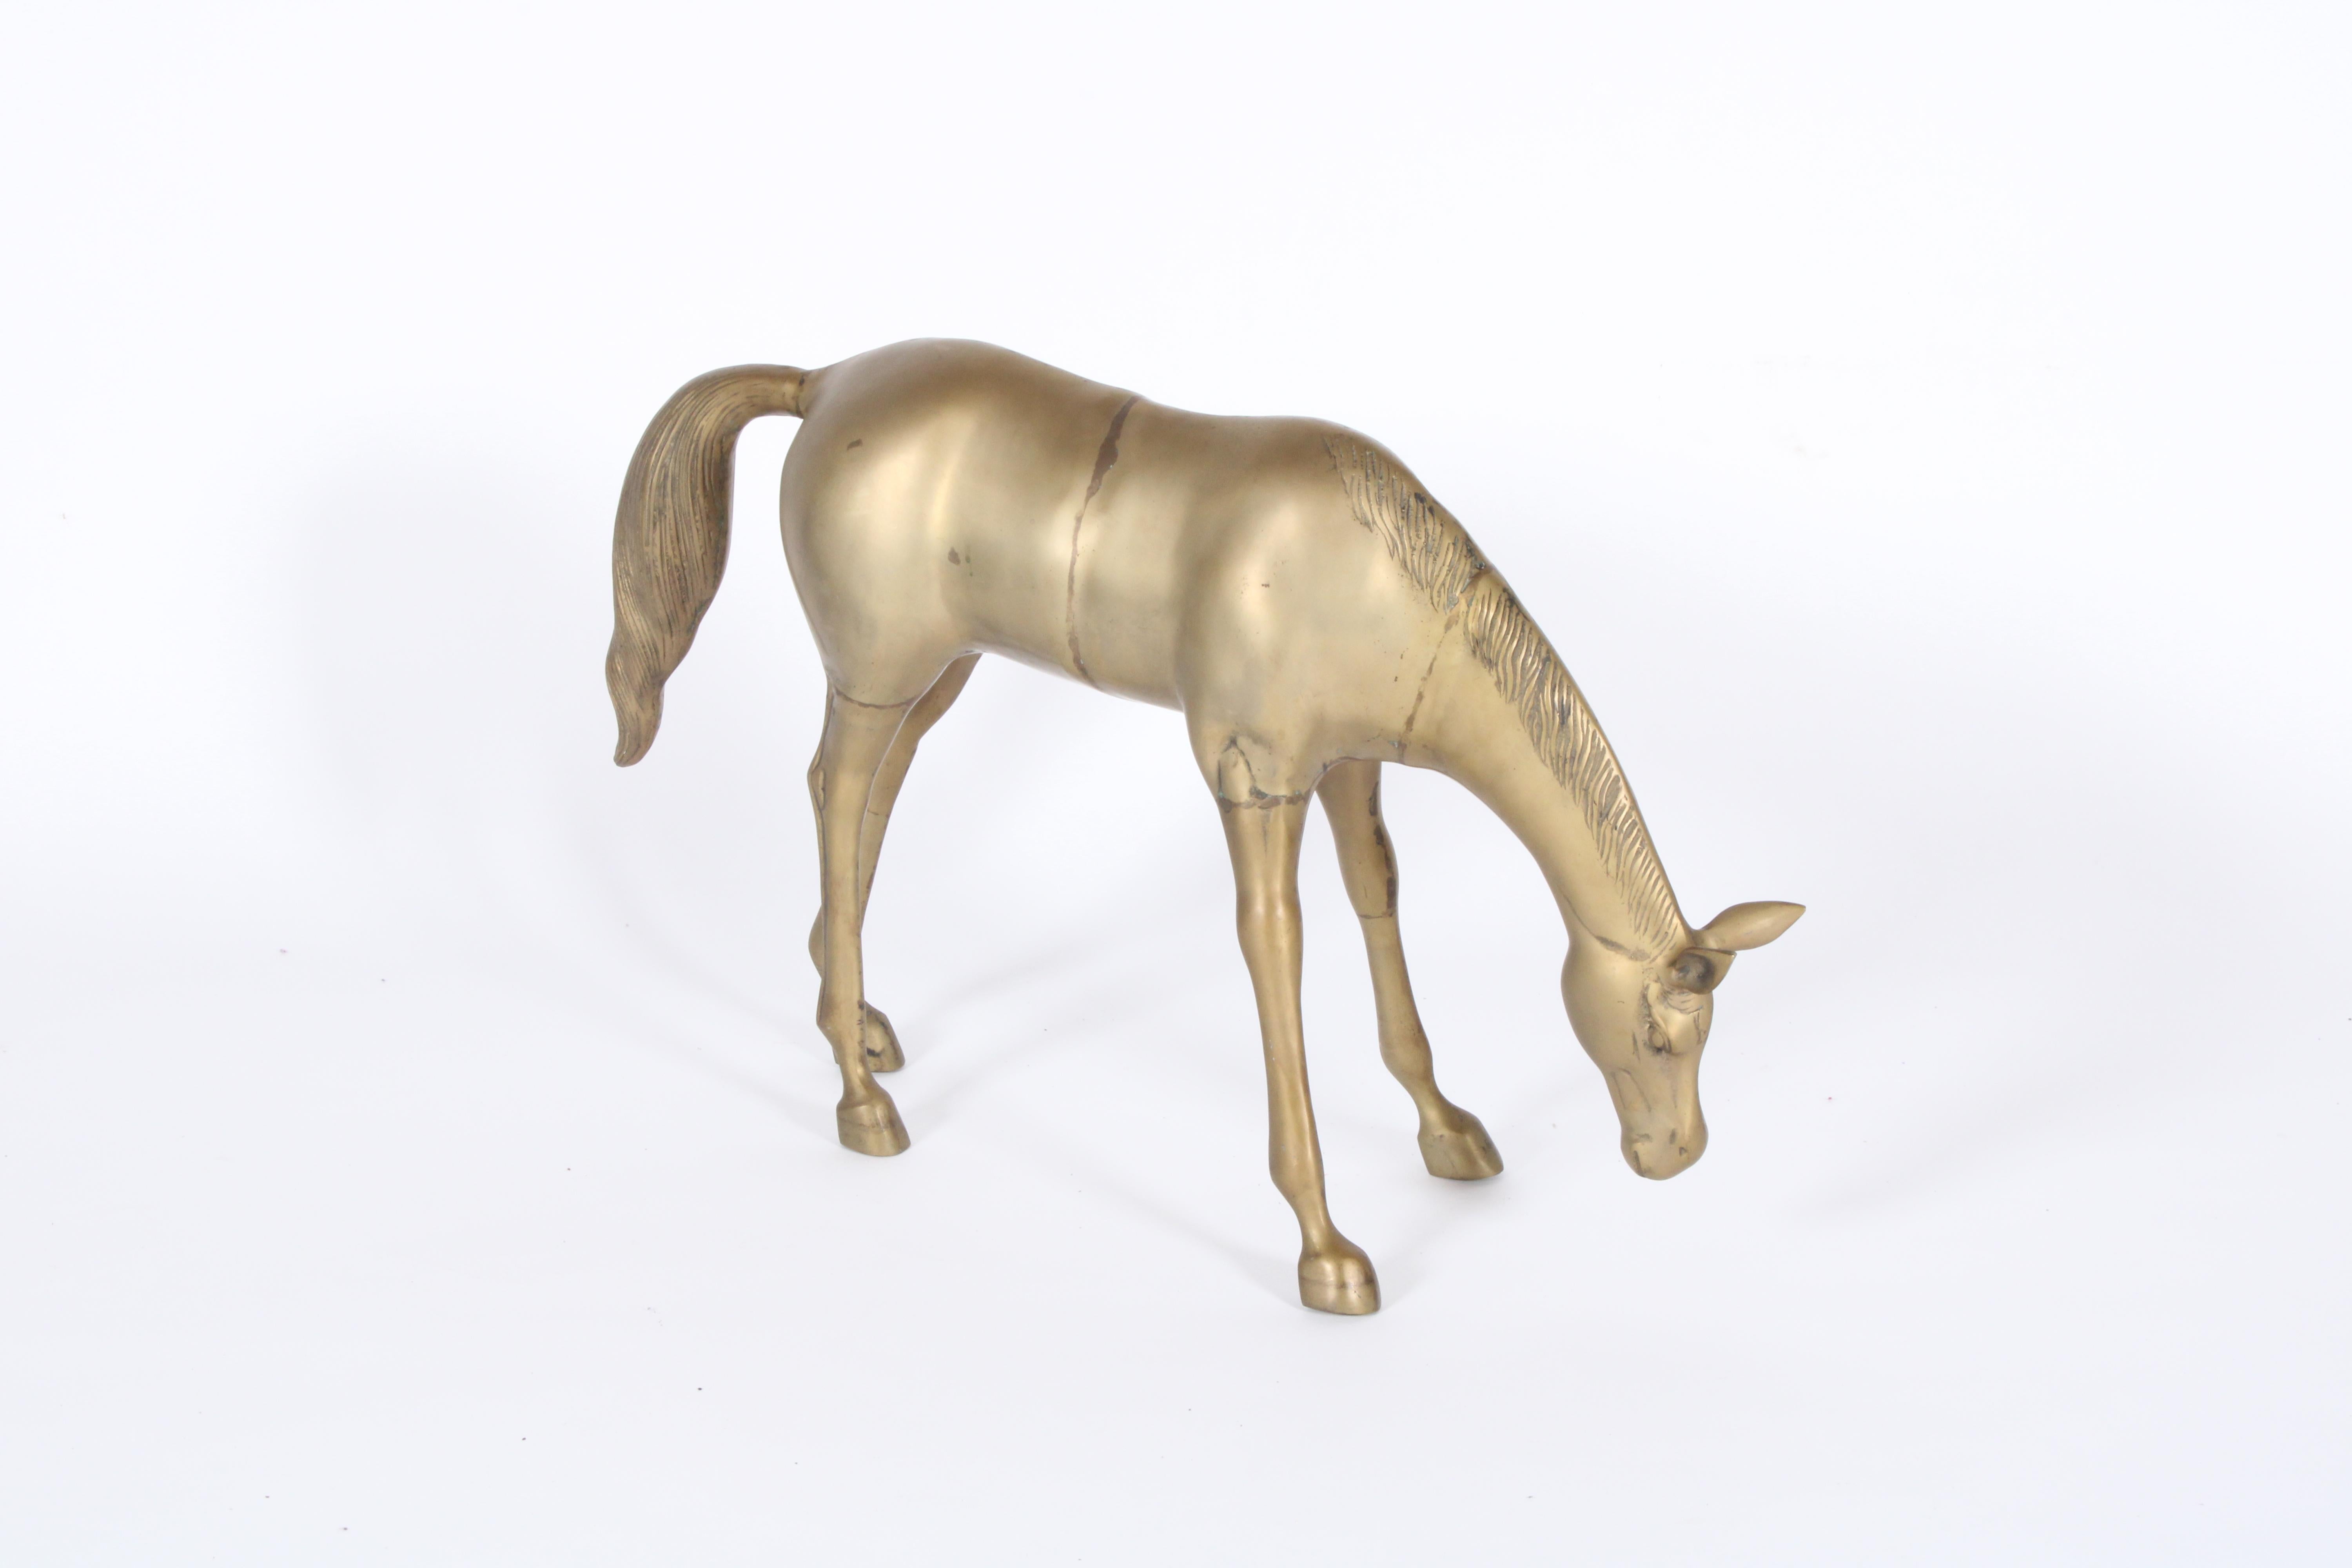 Stunning Vintage Artisan Decorative Brass Horse Sculpture  In Good Condition For Sale In Portlaoise, IE